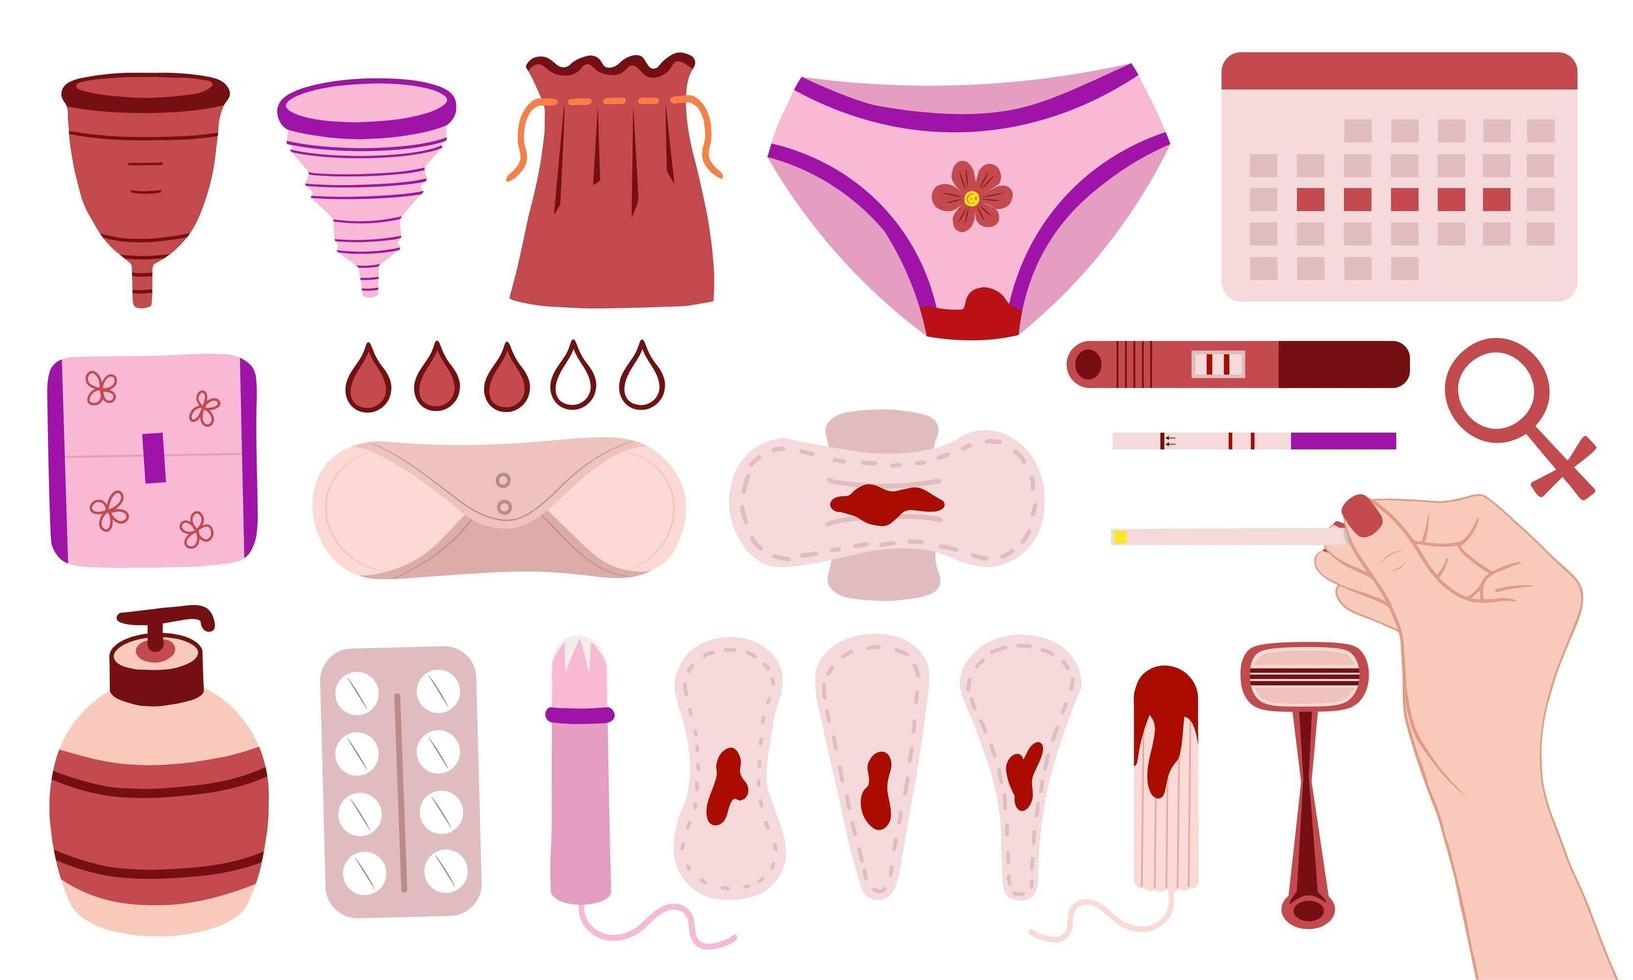 Menstrual Care Products Market'